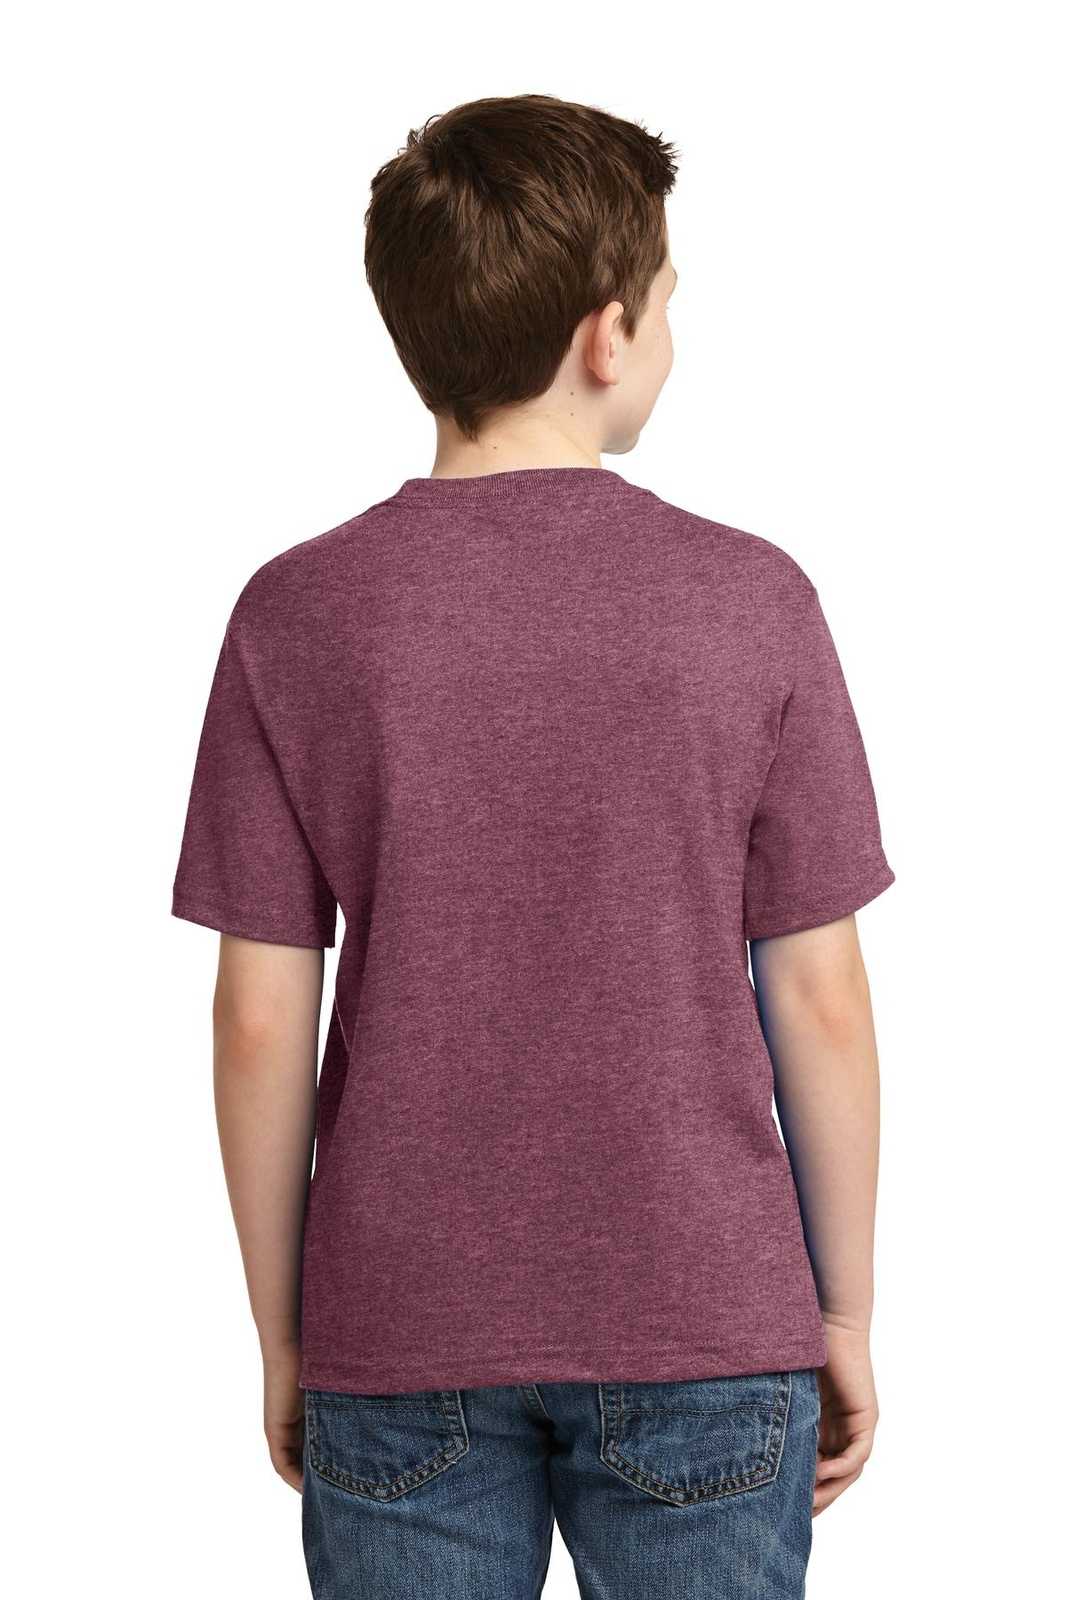 Jerzees 29B Youth Dri-Power 50/50 Cotton/Poly T-Shirt - Vintage Heather Maroon - HIT a Double